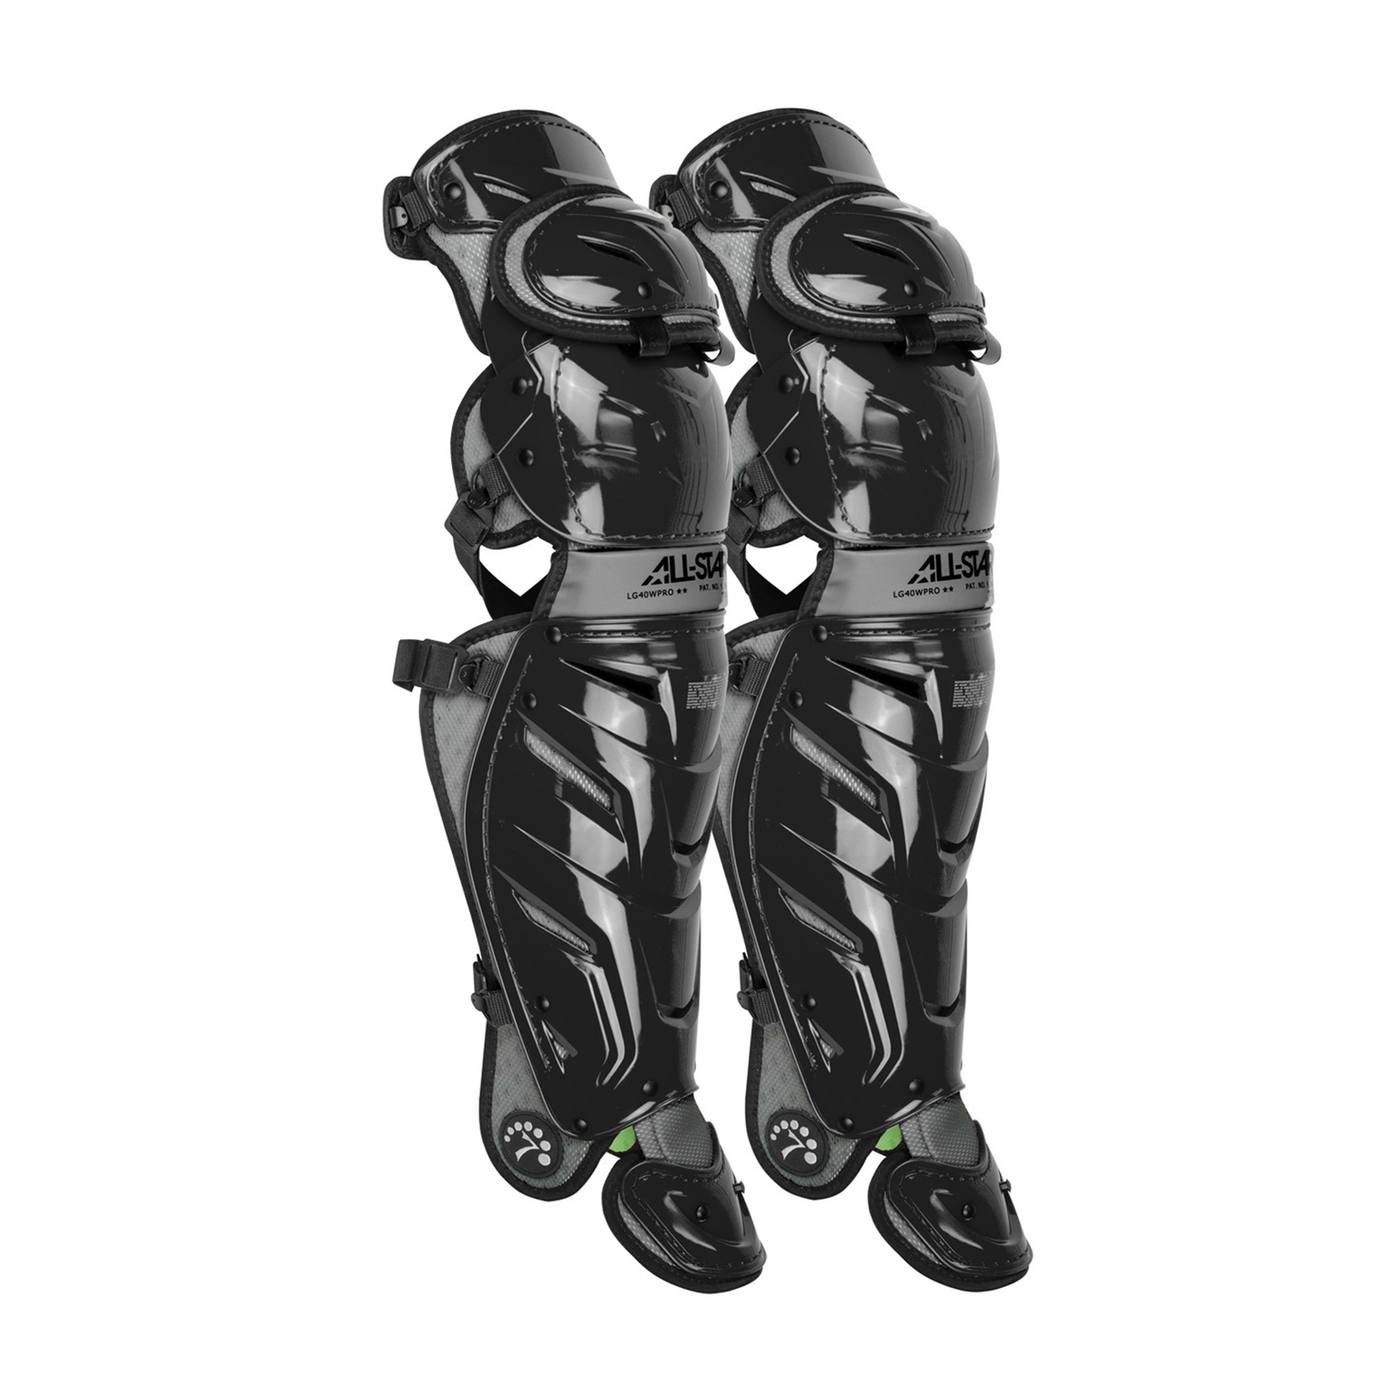 All Star Axis Leg Guards